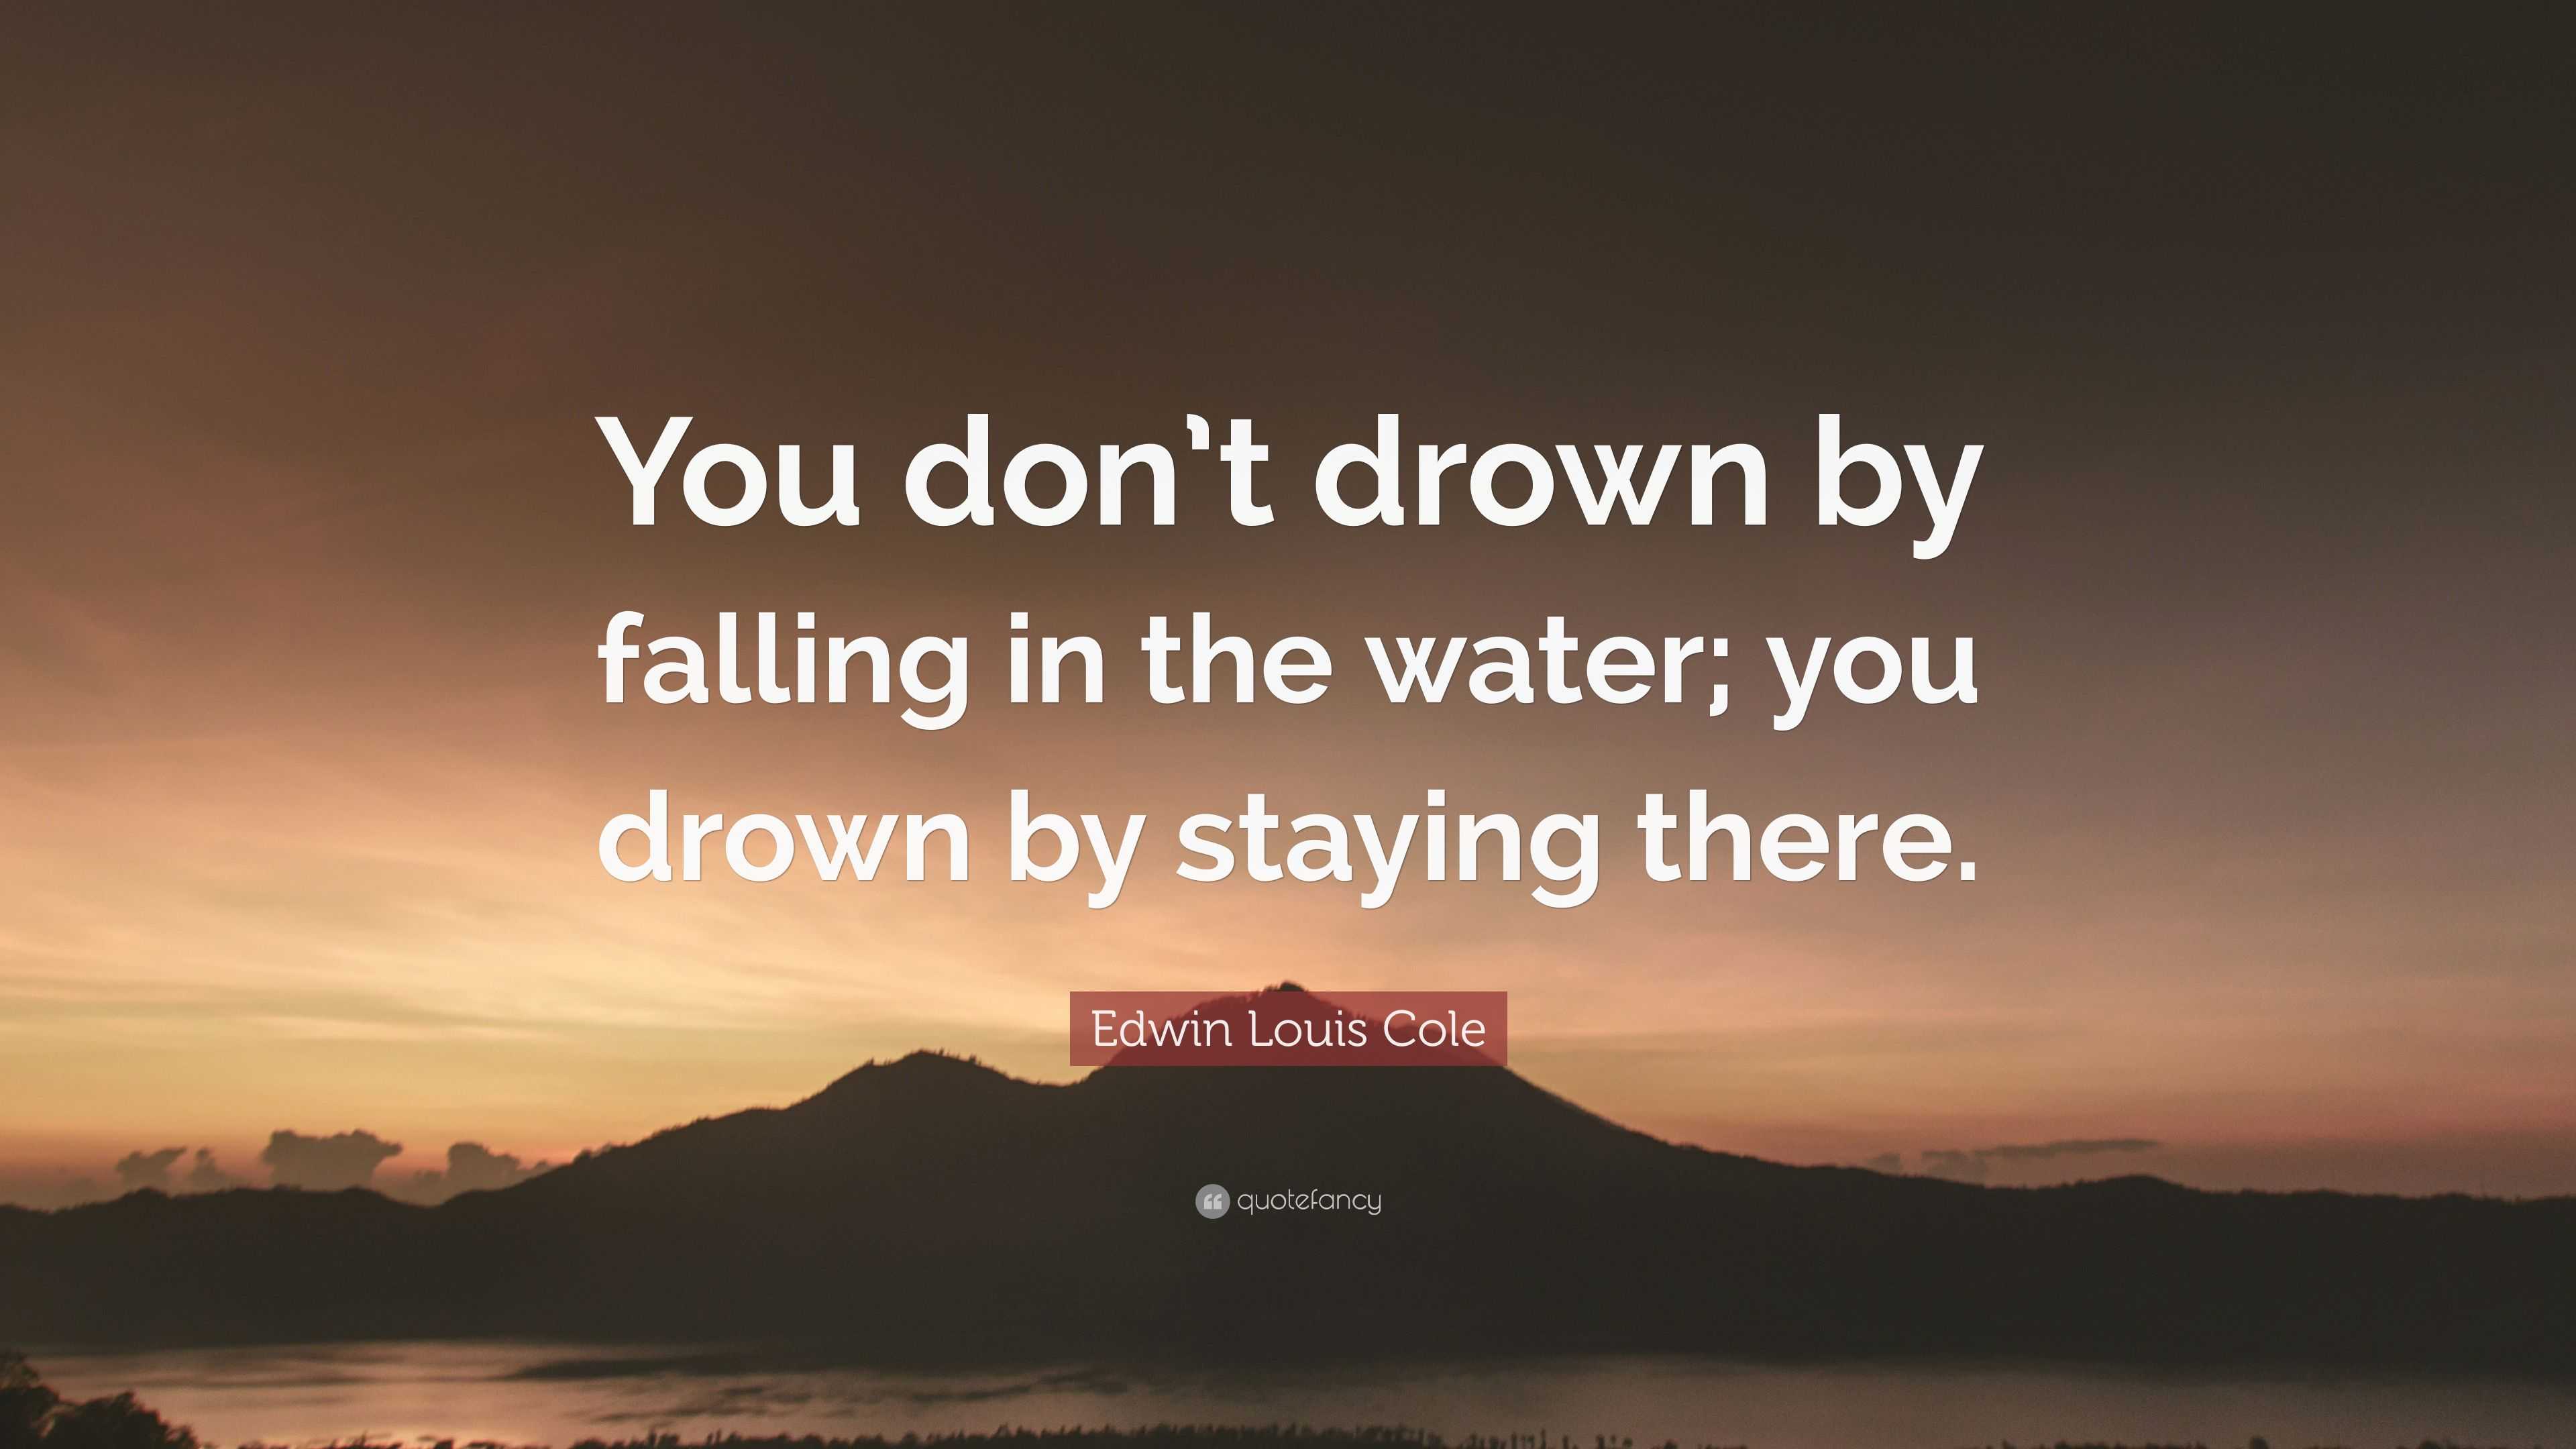 Edwin Louis Cole - You don't drown by falling in the water; you drown by  staying there - Quote - Quotees